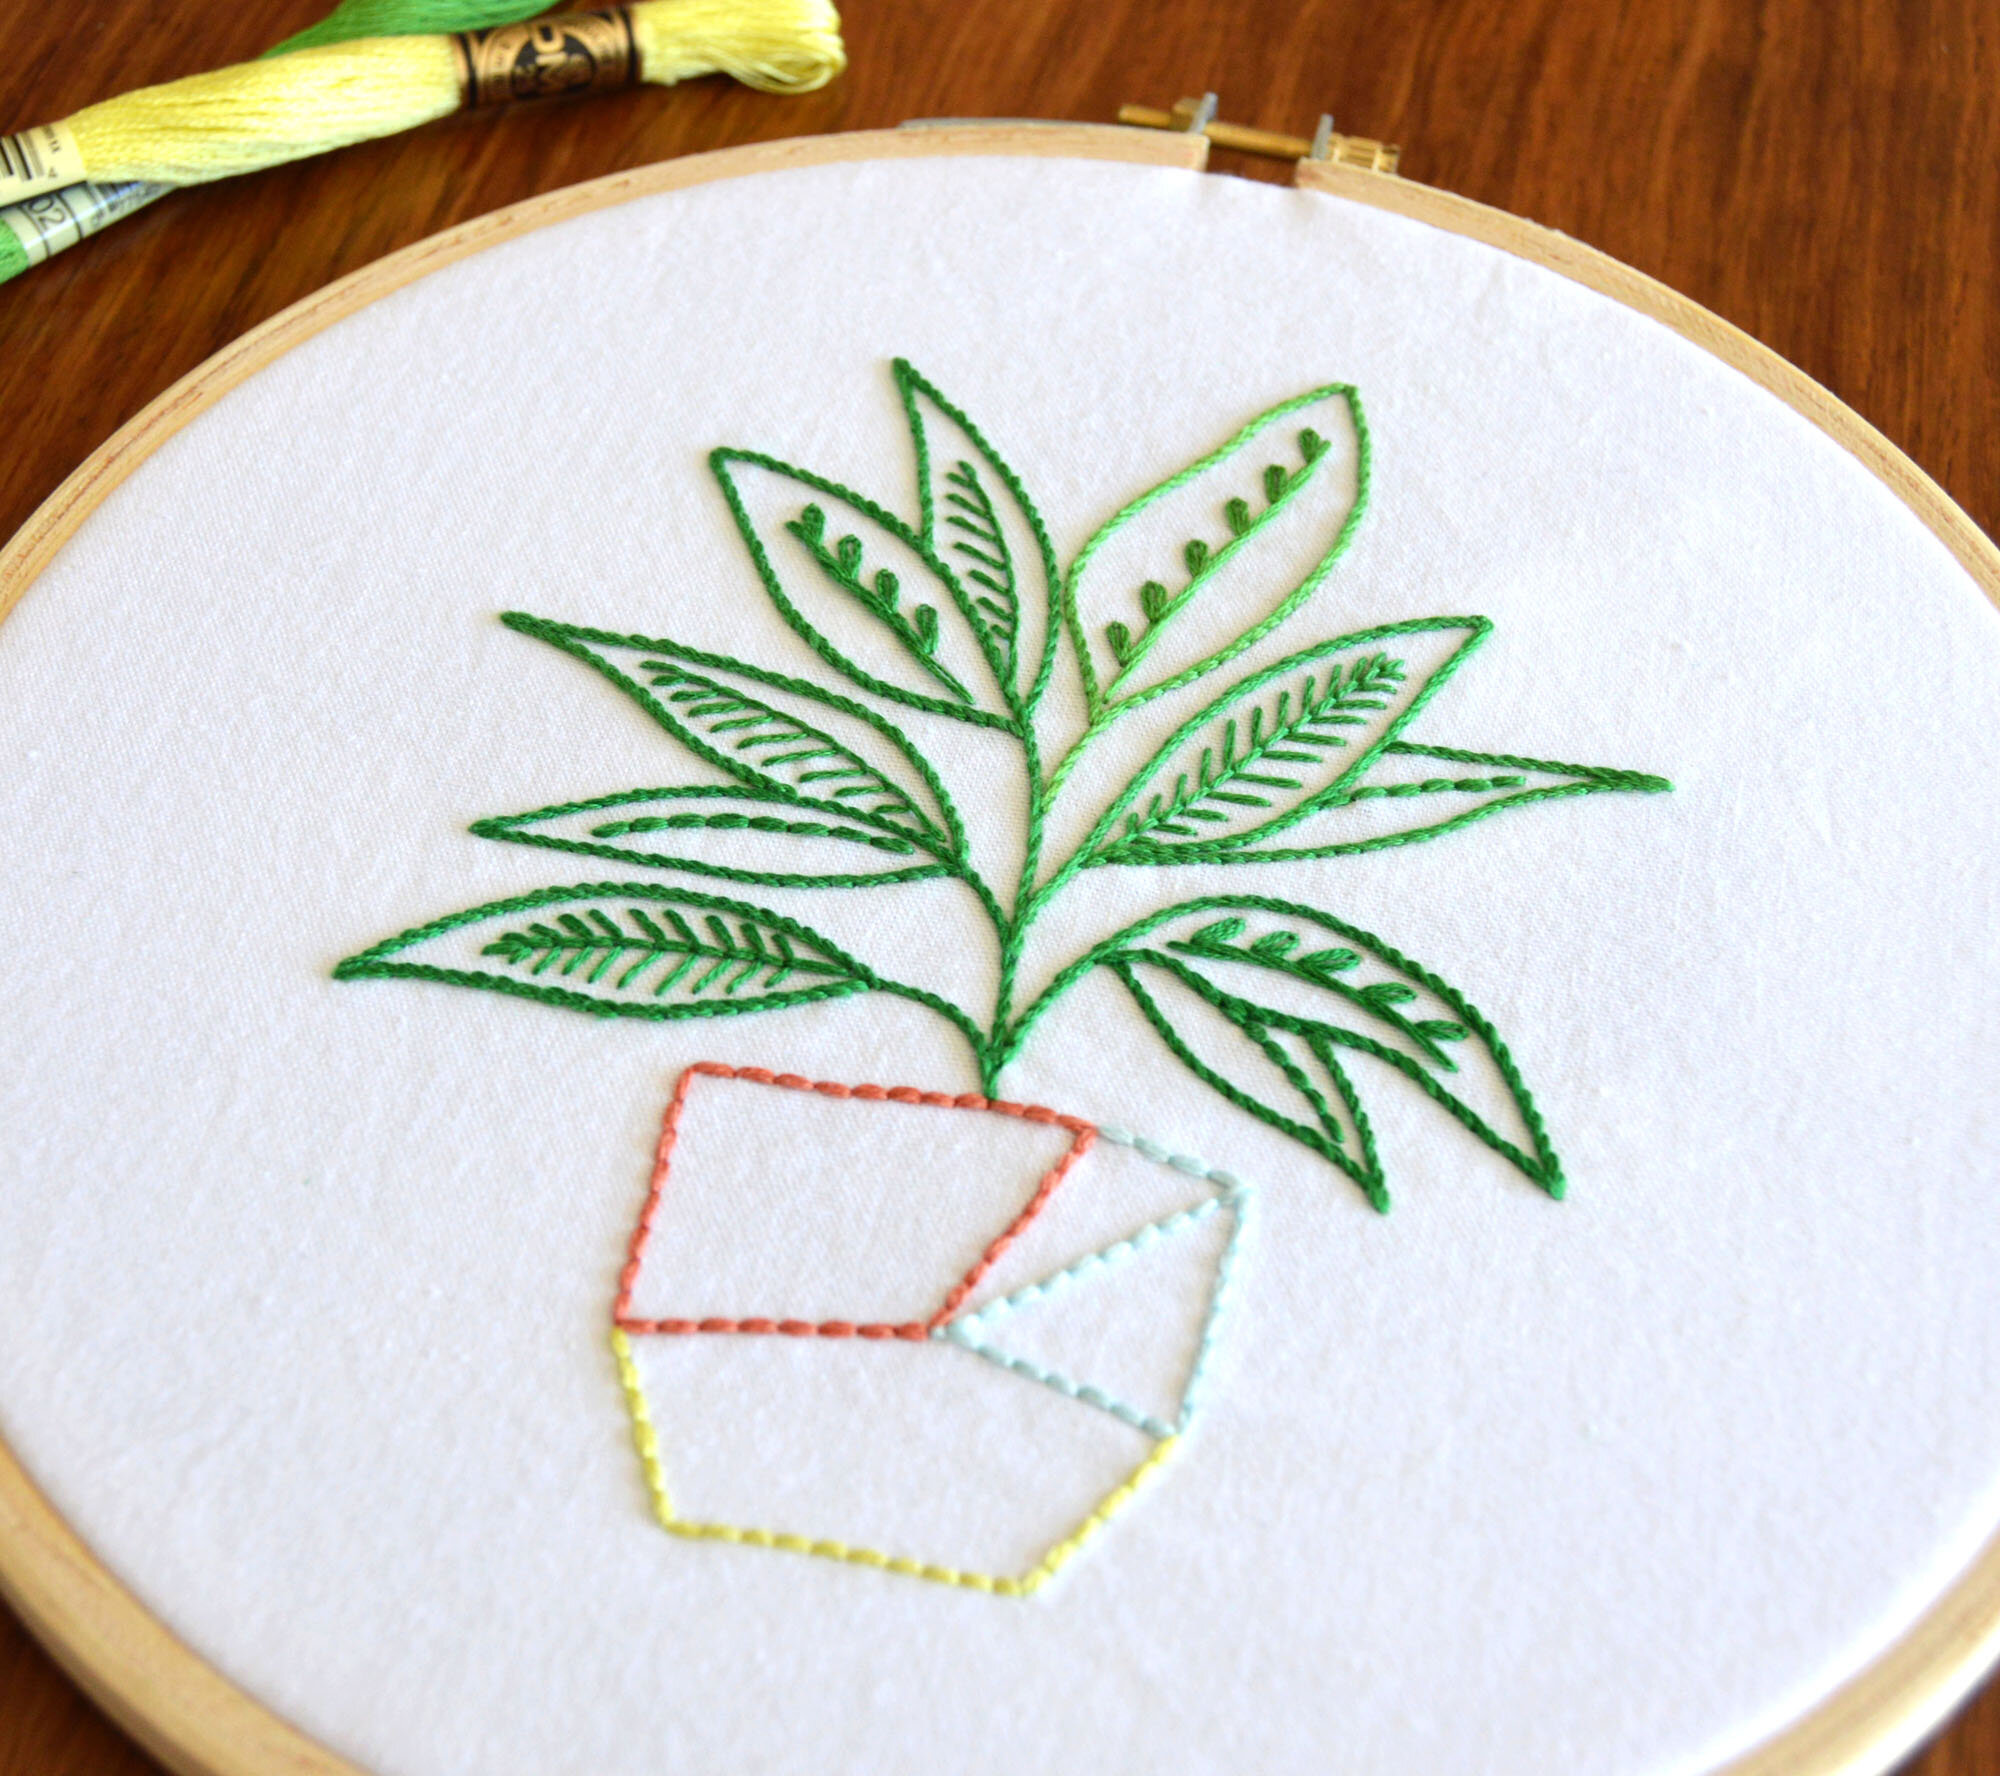 Embroidery Books Patterns, Plant Embroidery Book, Craft Embroidery Book